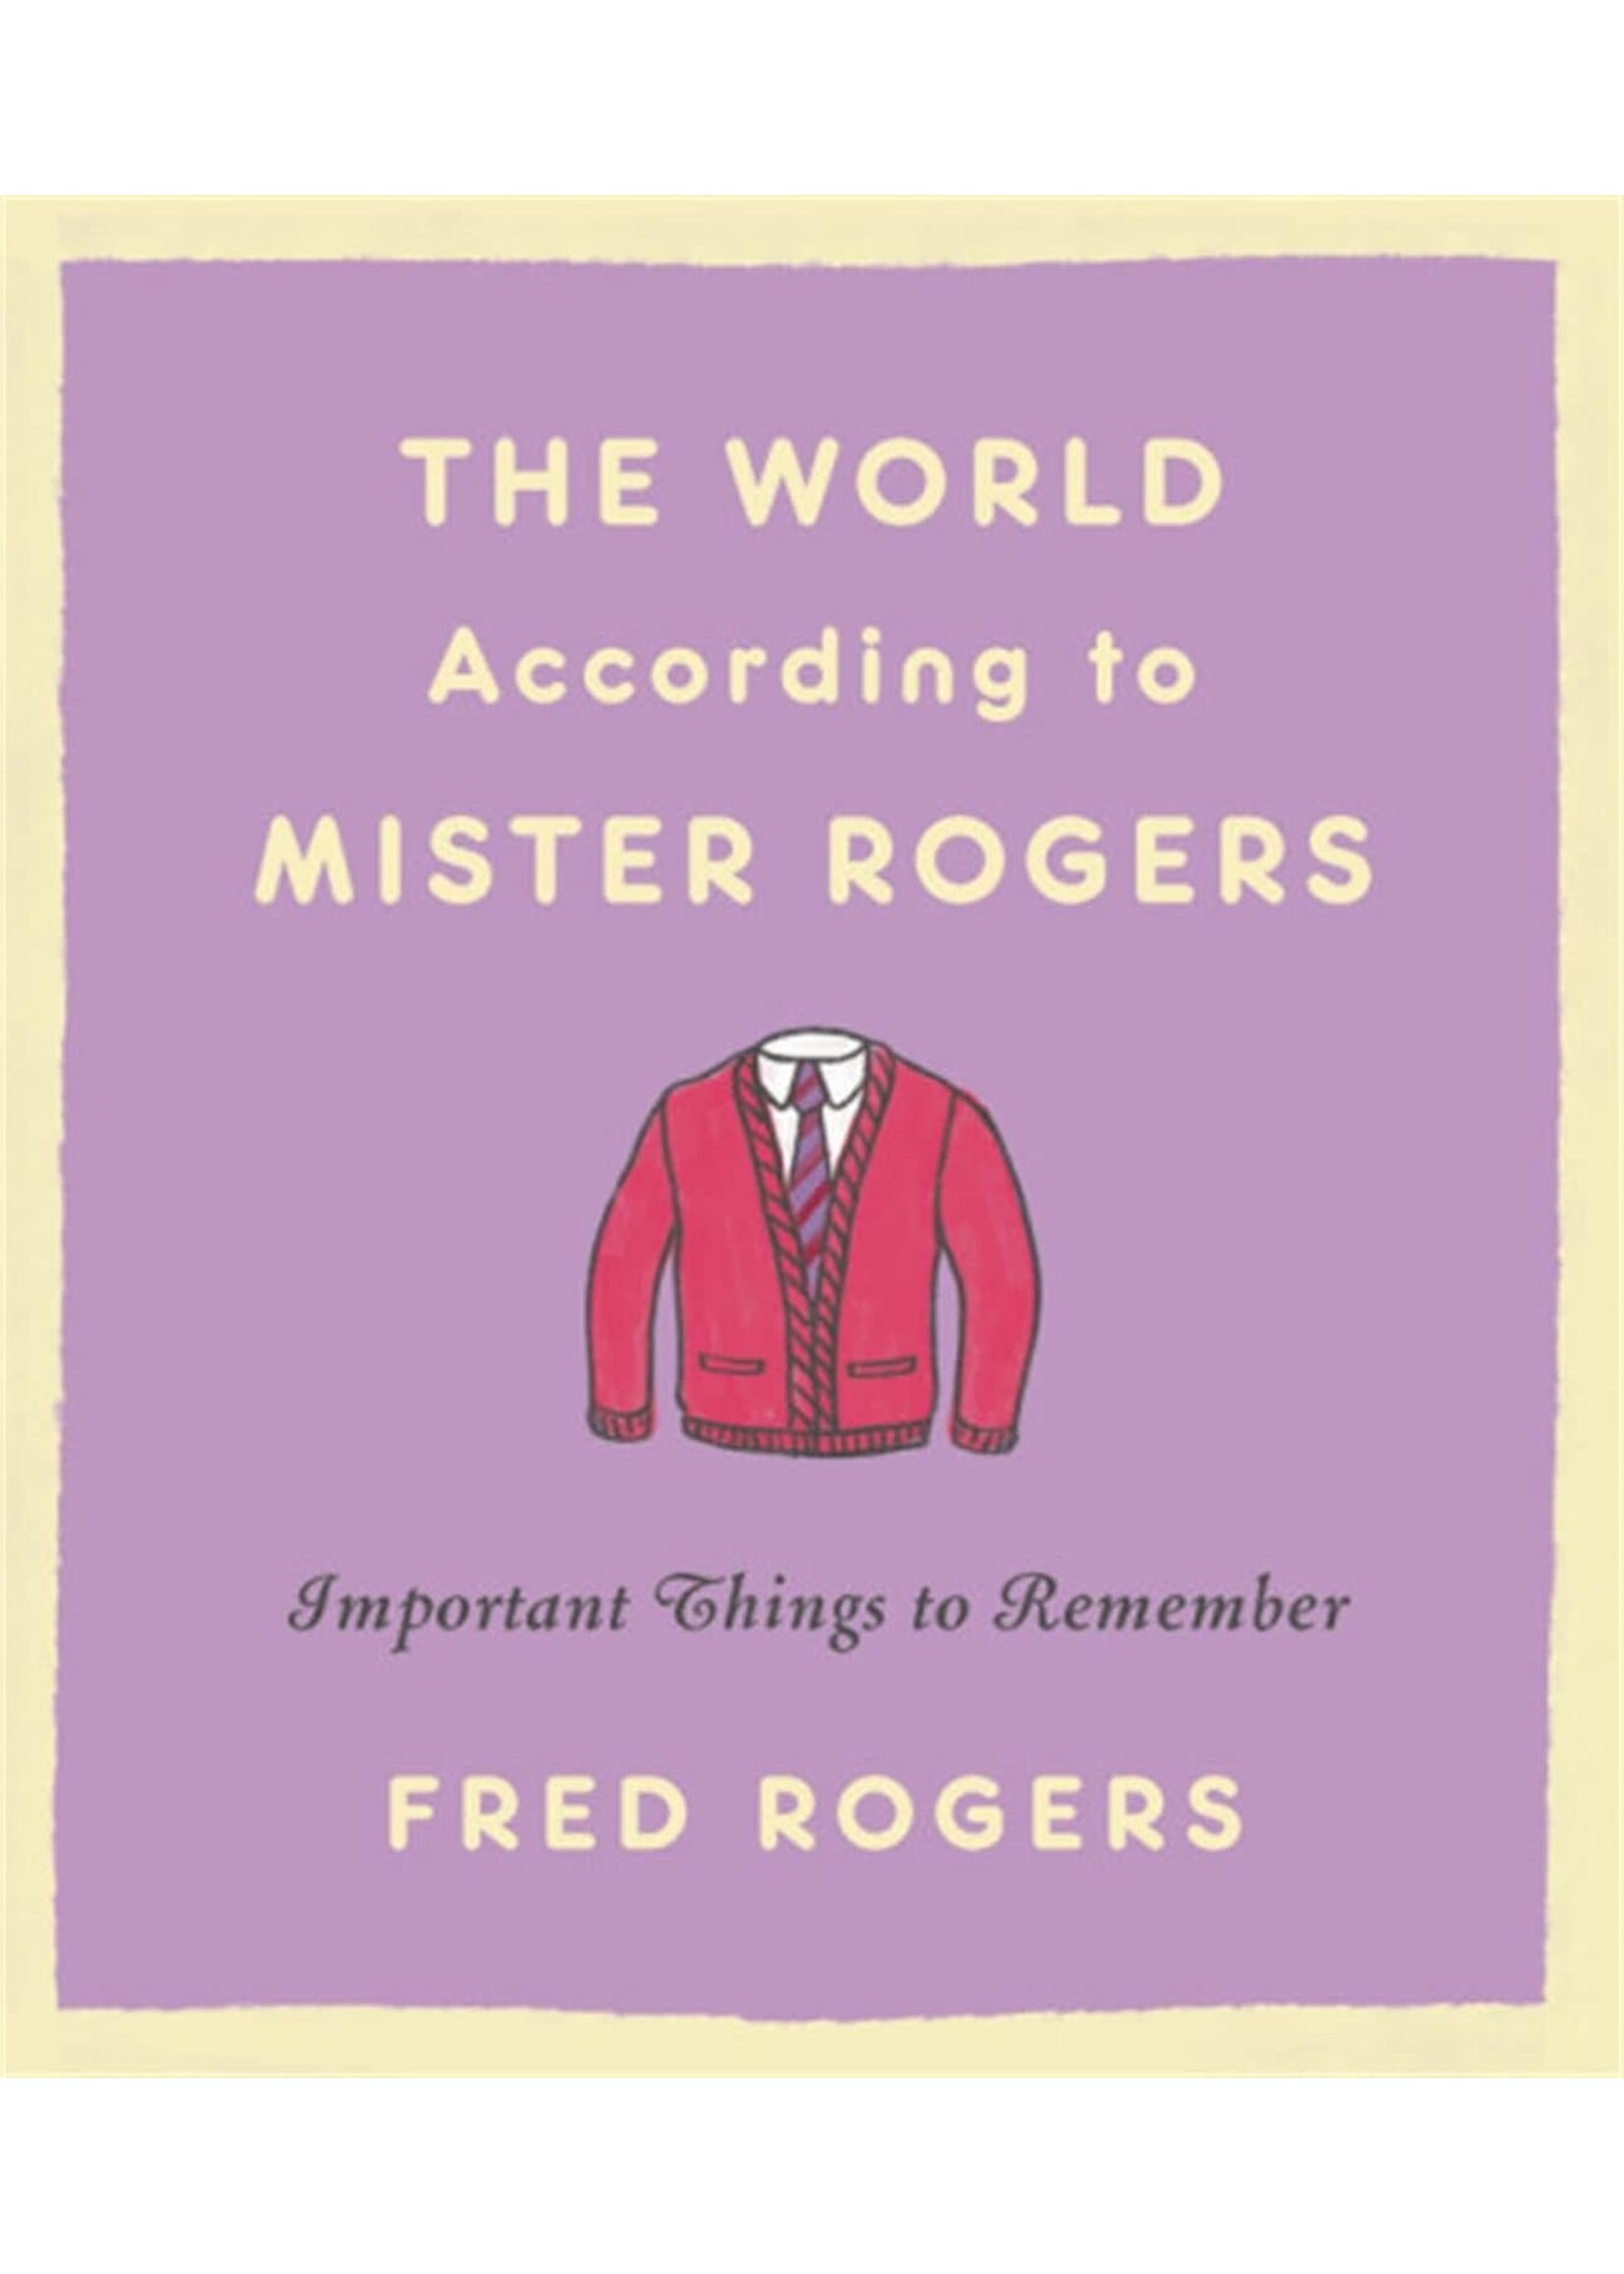 The World According to Mister Rogers - Important Things to Remember